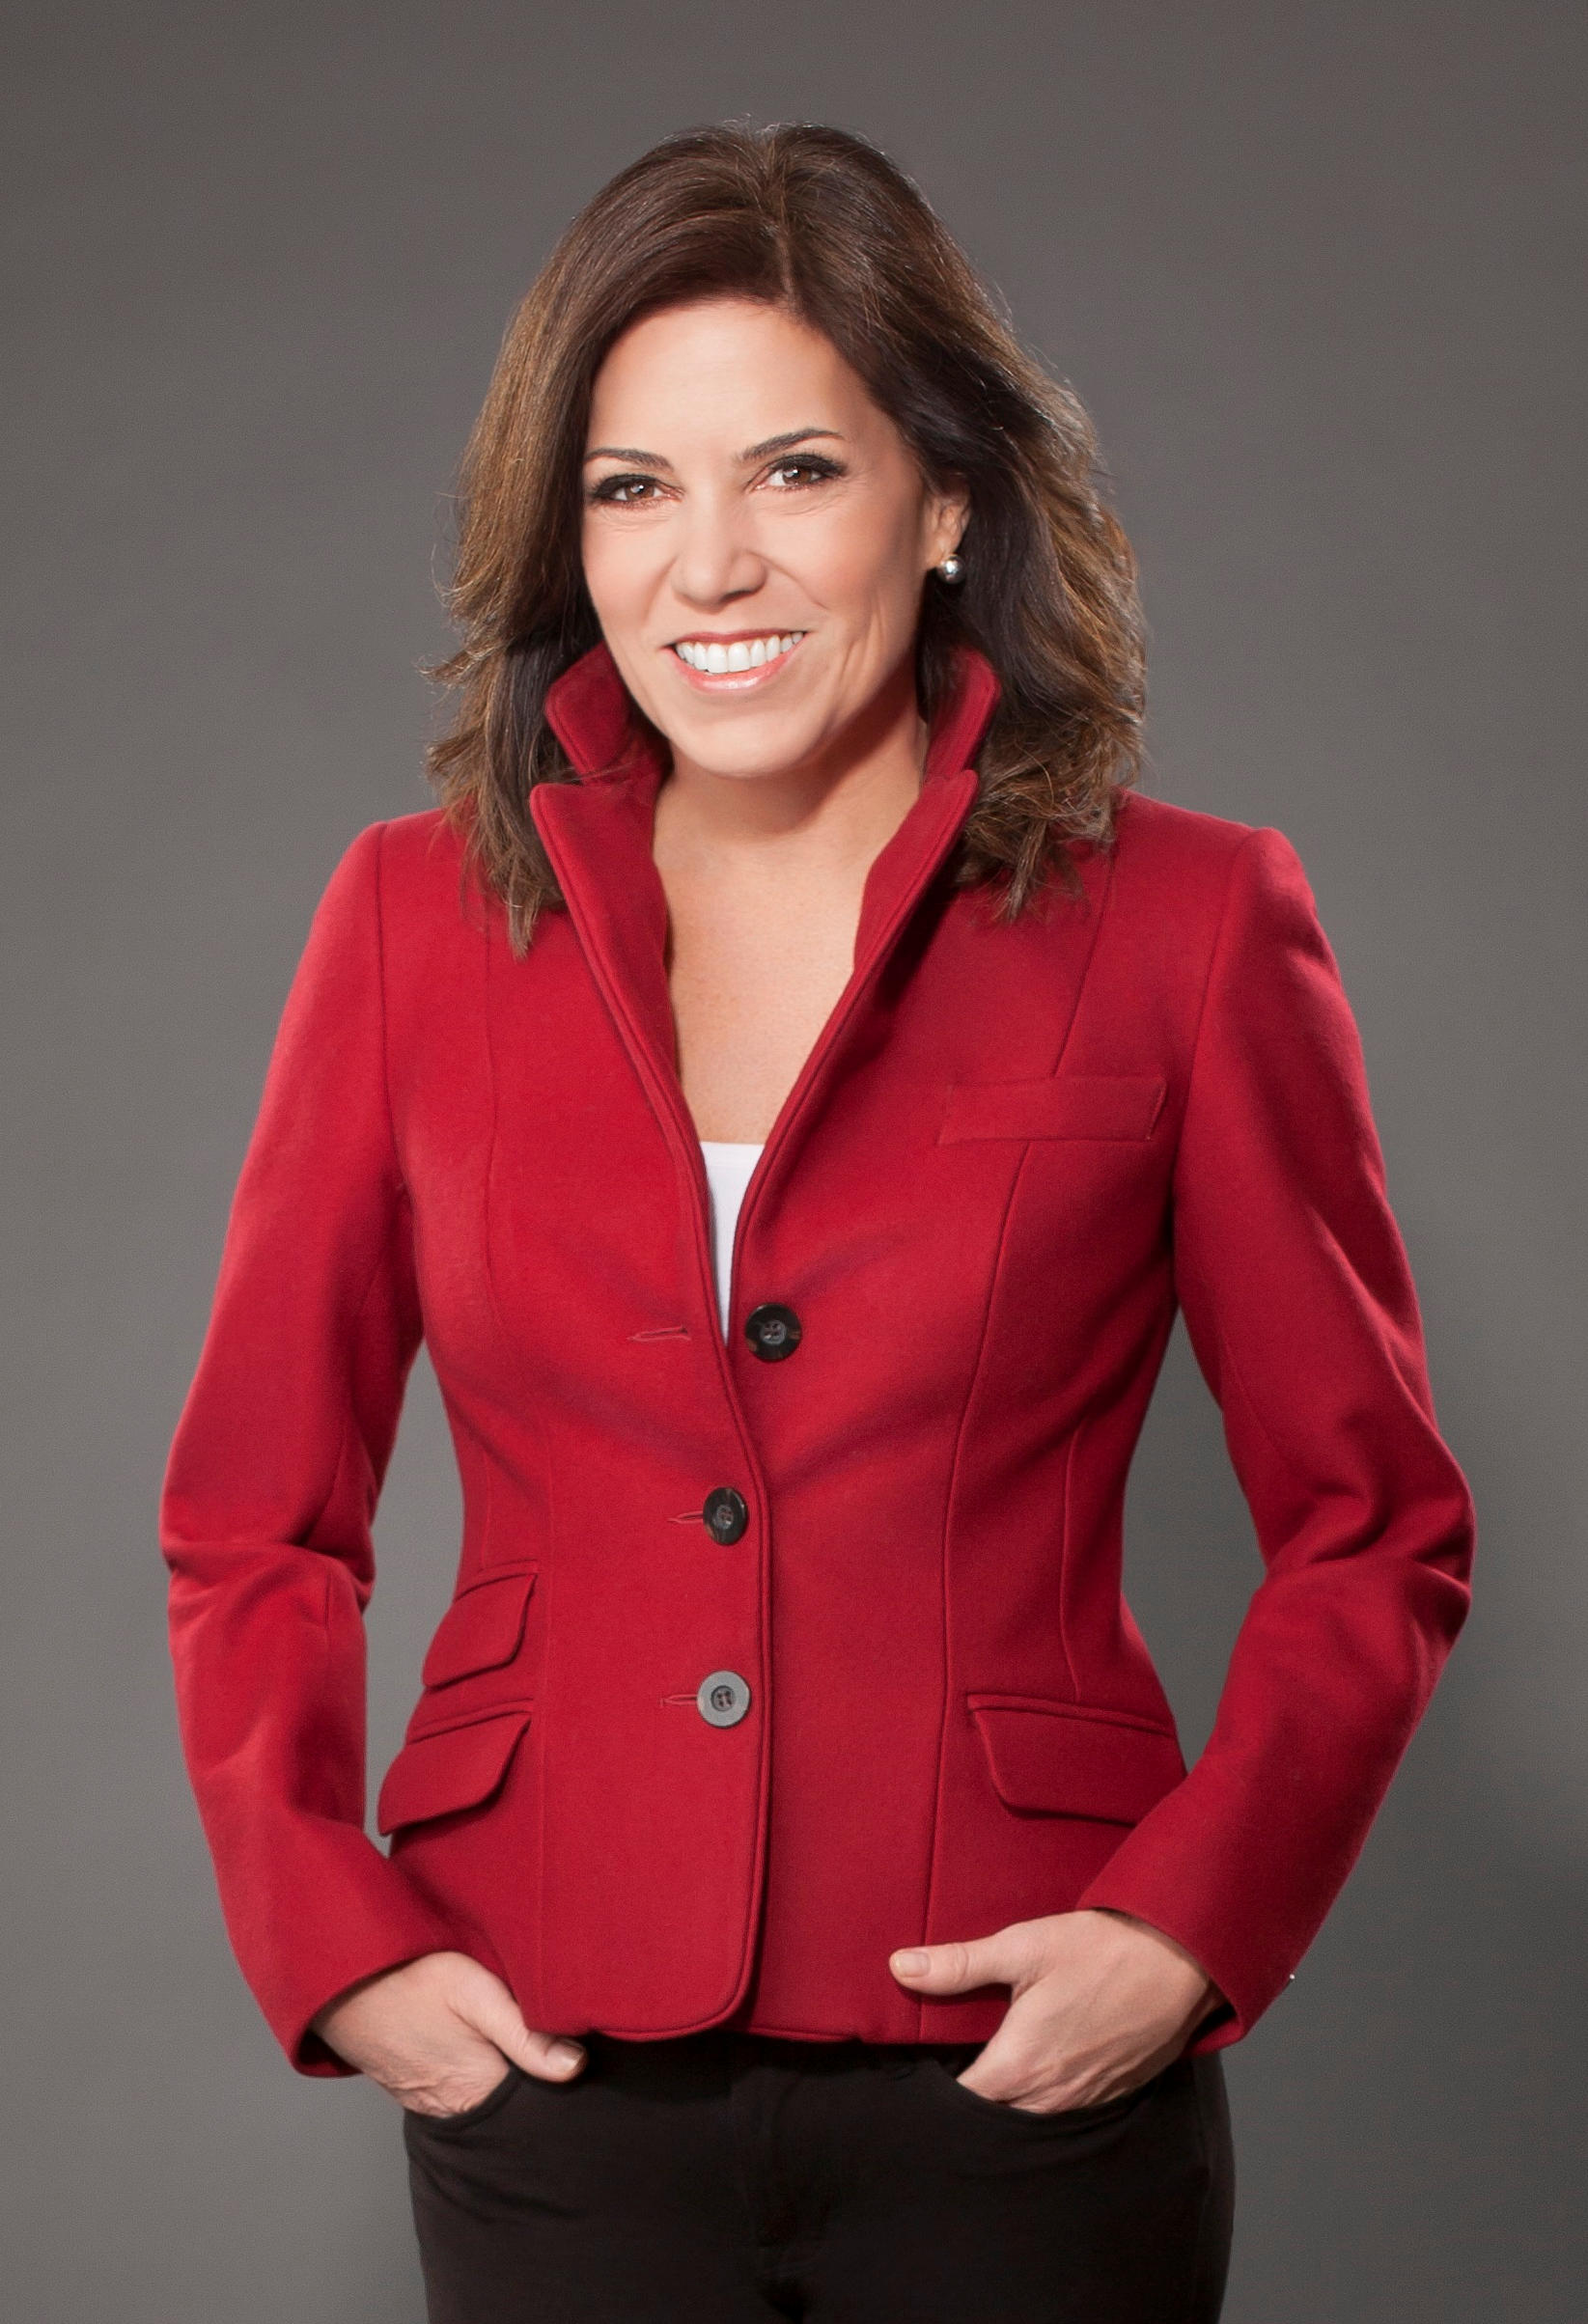 Michele tafoya works 200TH game on NFL sidelines this sunday as patriots vi...